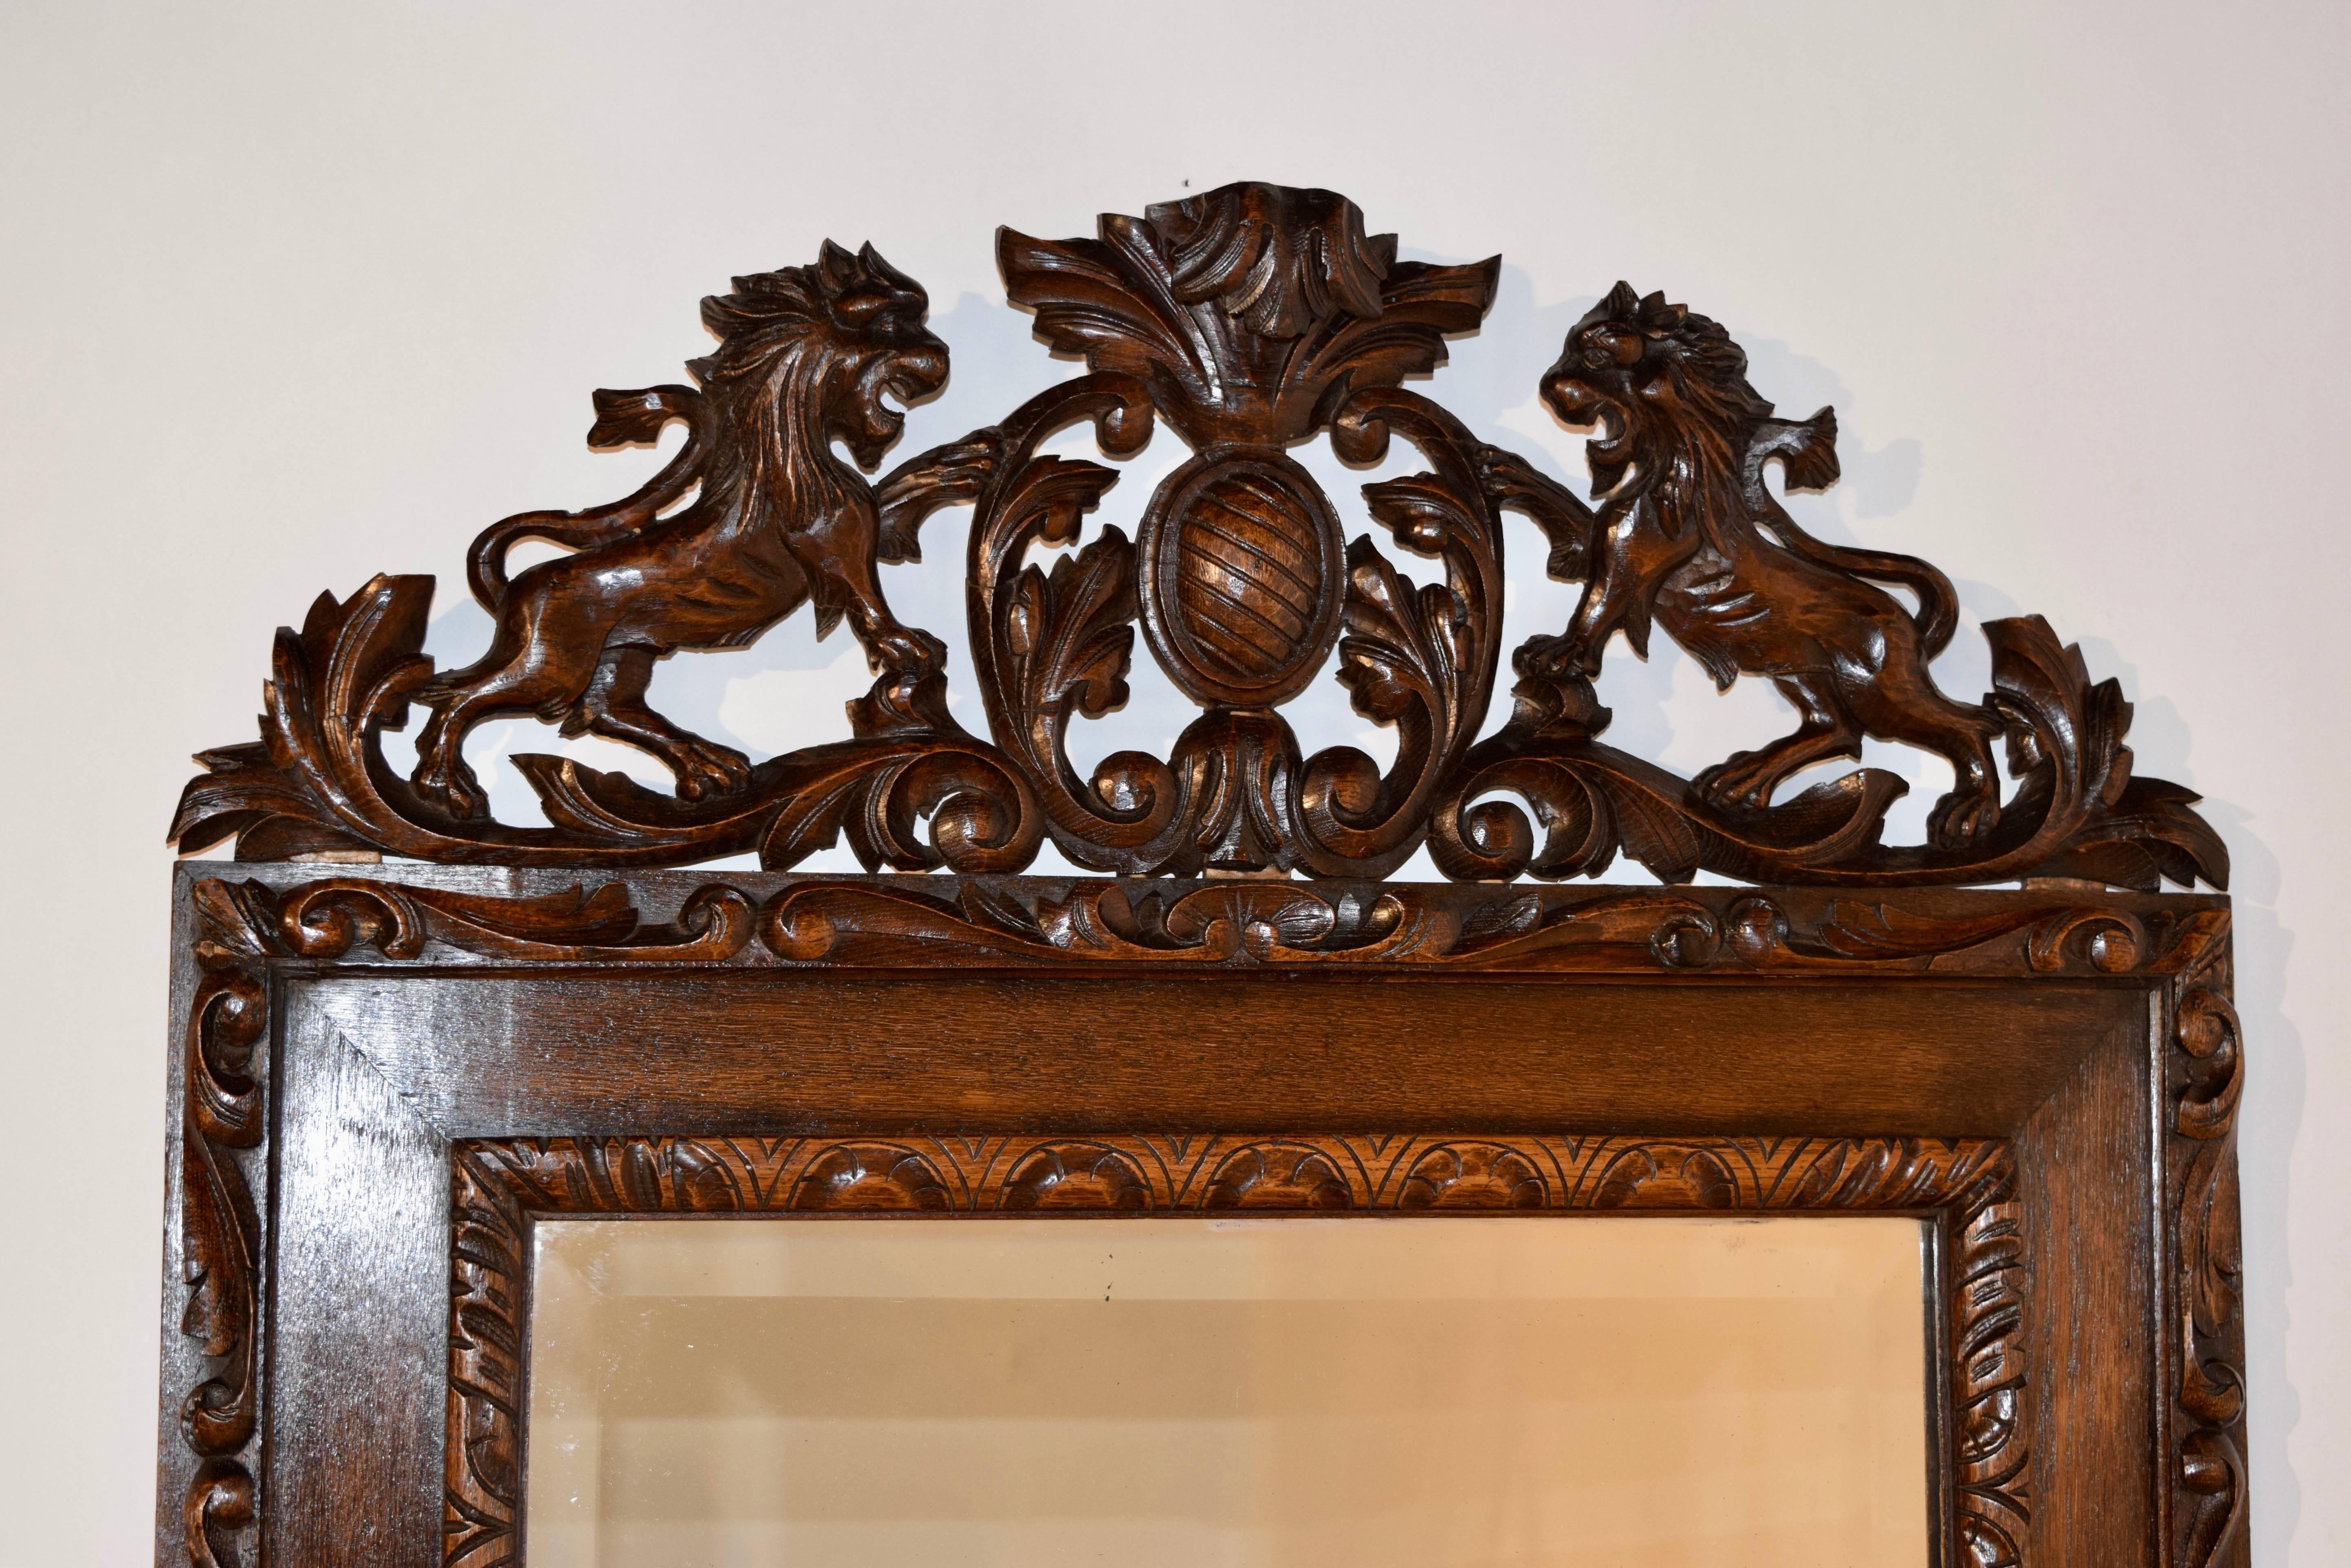 19th century English mirror with lovely hand-carved borders around the inner and outer edges of the frame and a hand-carved armorial on the top of the mirror depicting two lions flanking a plaque.